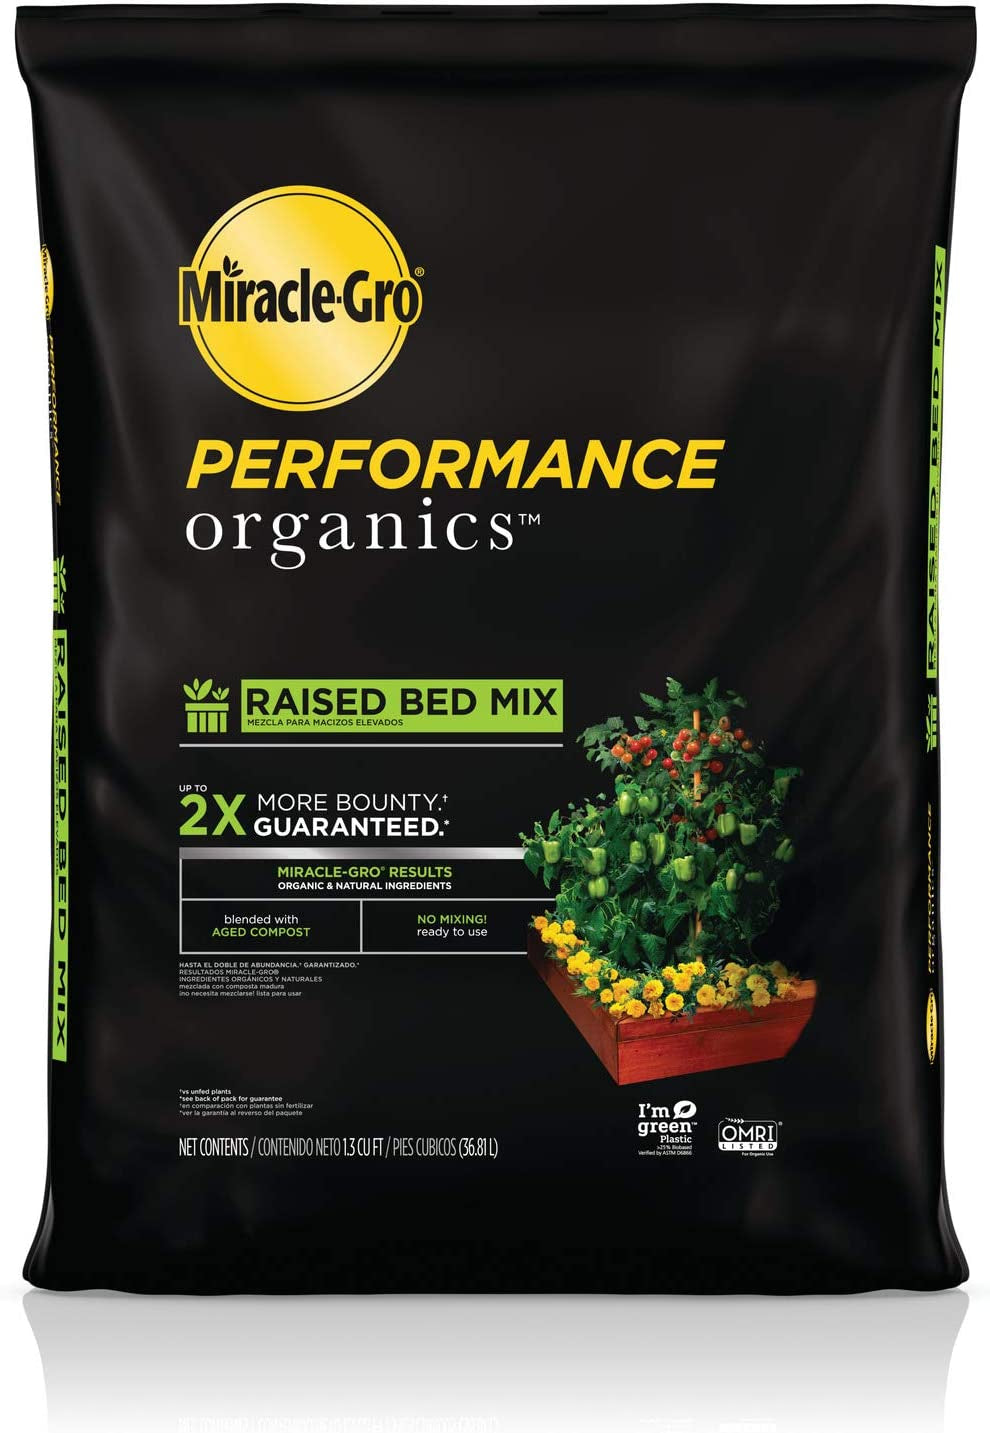 Performance Organics Raised Bed Mix - Organic and Natural Ingredients, Potting Soil Blended for Raised Bed Gardening, Grow More Vegetables, Flowers and Herbs (Vs Unfed Plants), 1.3 Cu. Ft.